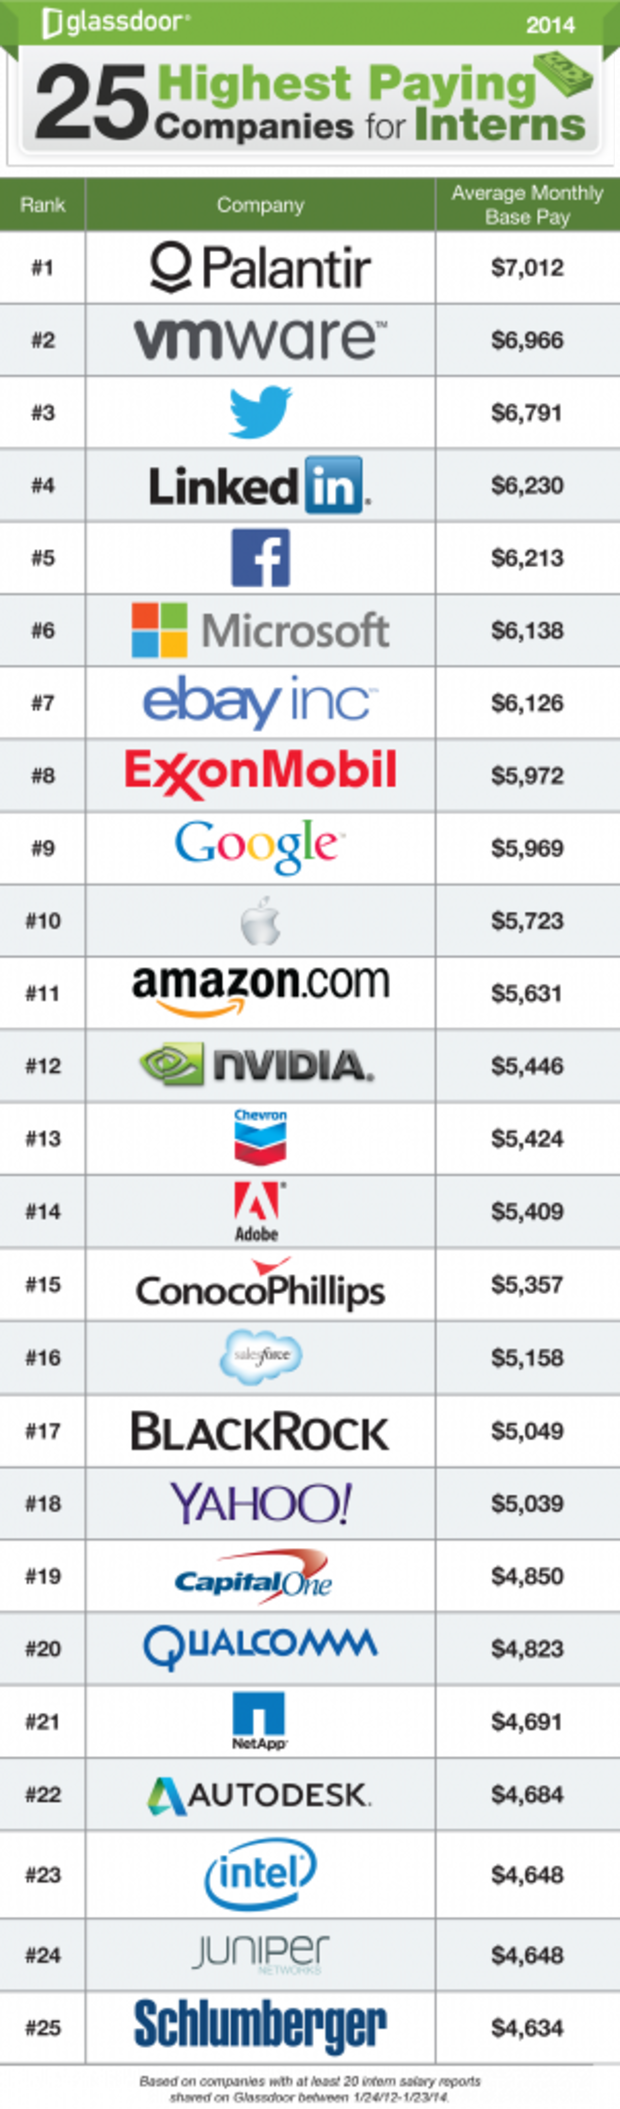 25-Highest-Paying-Companies-for-Interns-301x1024 